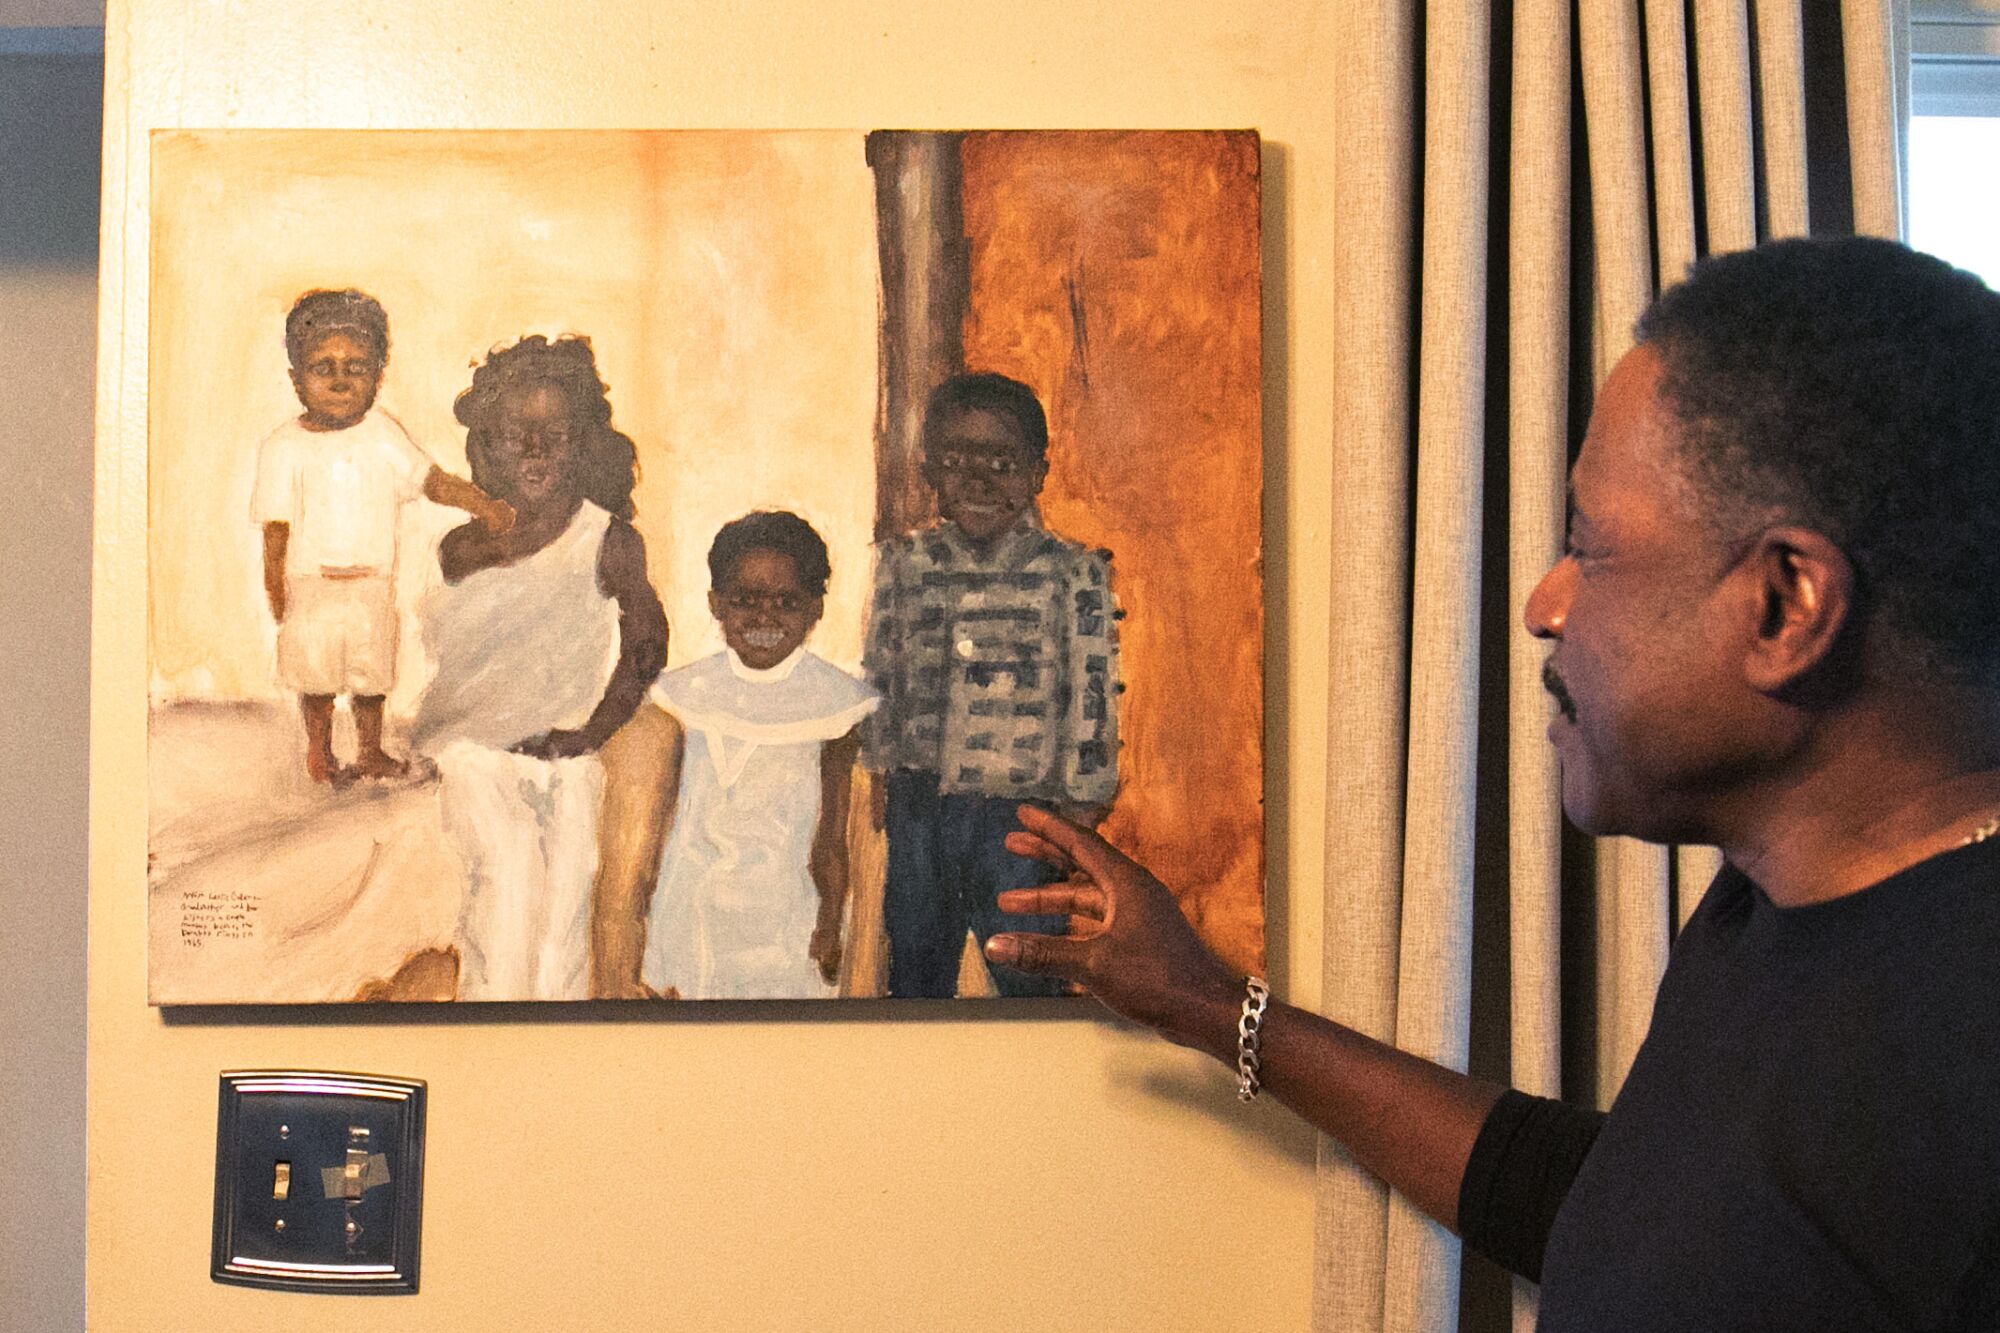 A man stands pointing to a painting of a family